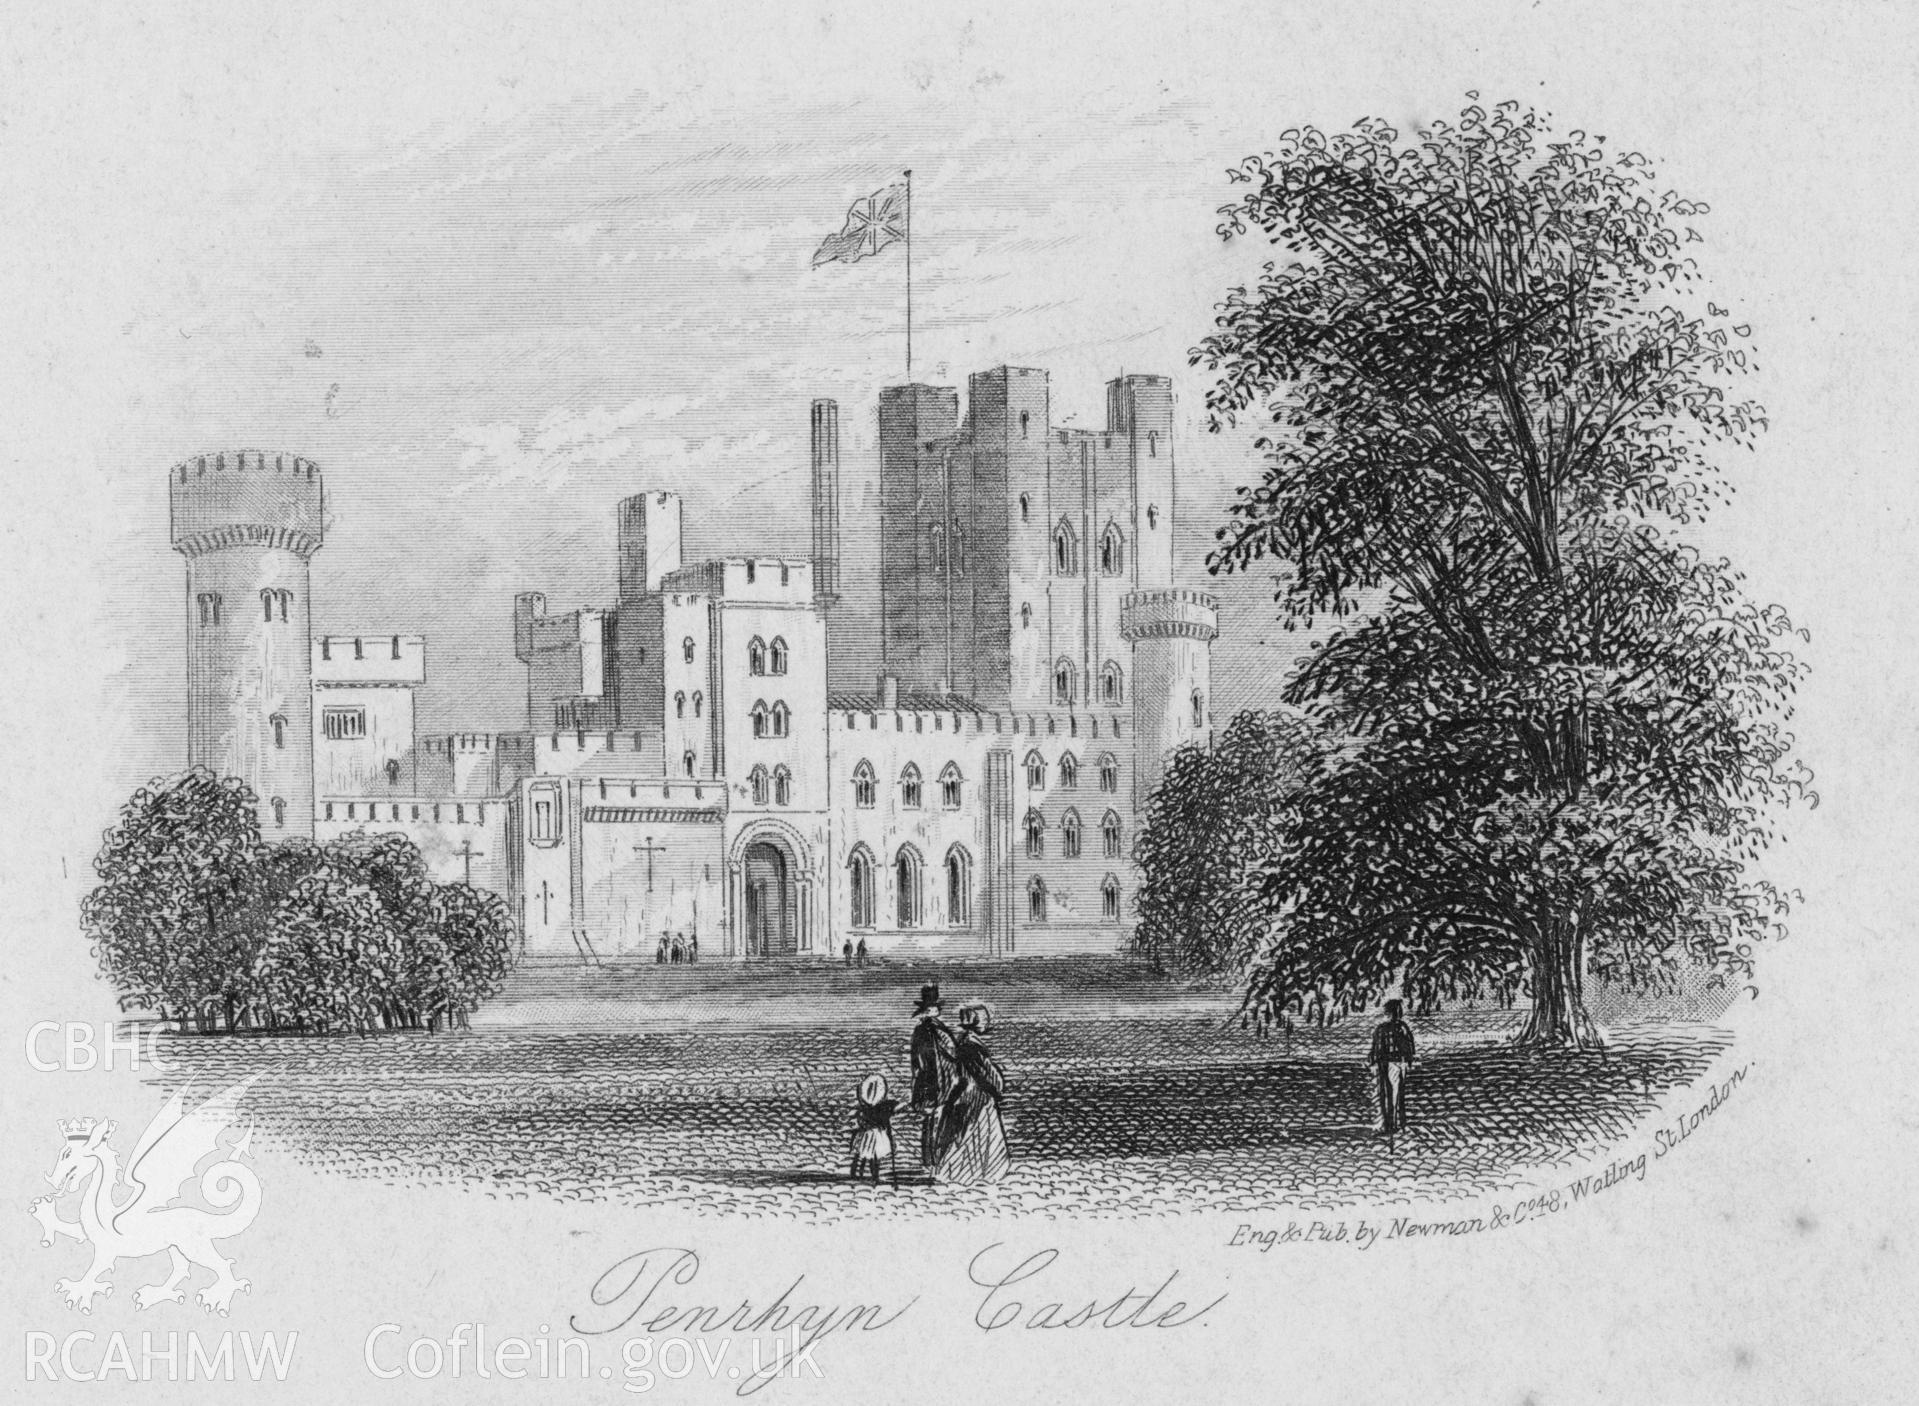 Digital copy of an etching showing view of the entrance to Penrhyn Castle.